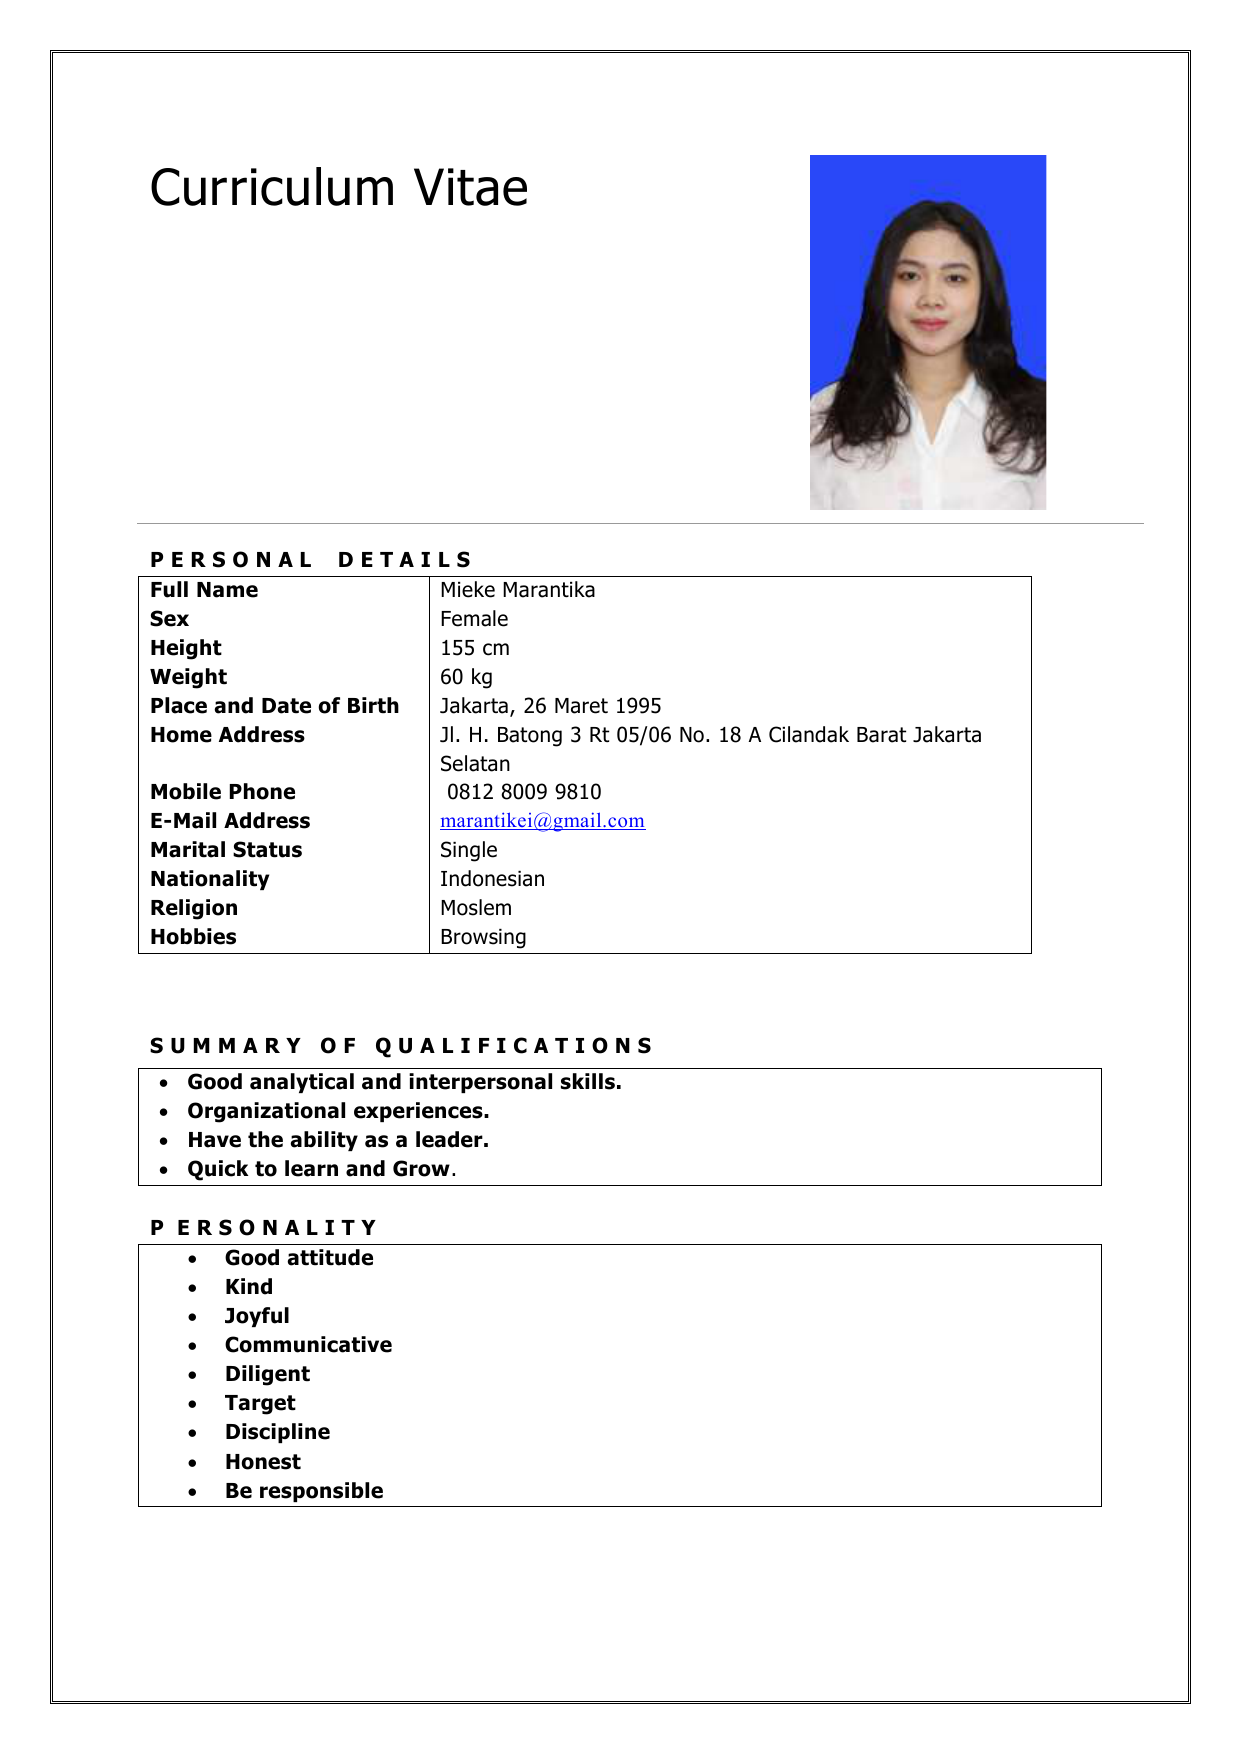 Curriculum Vitae PERSONAL DETAILS Full Name Mieke Marantika Female Height 155 cm Weight 60 kg Place and Date of Birth Jakarta 26 Maret 1995 Home